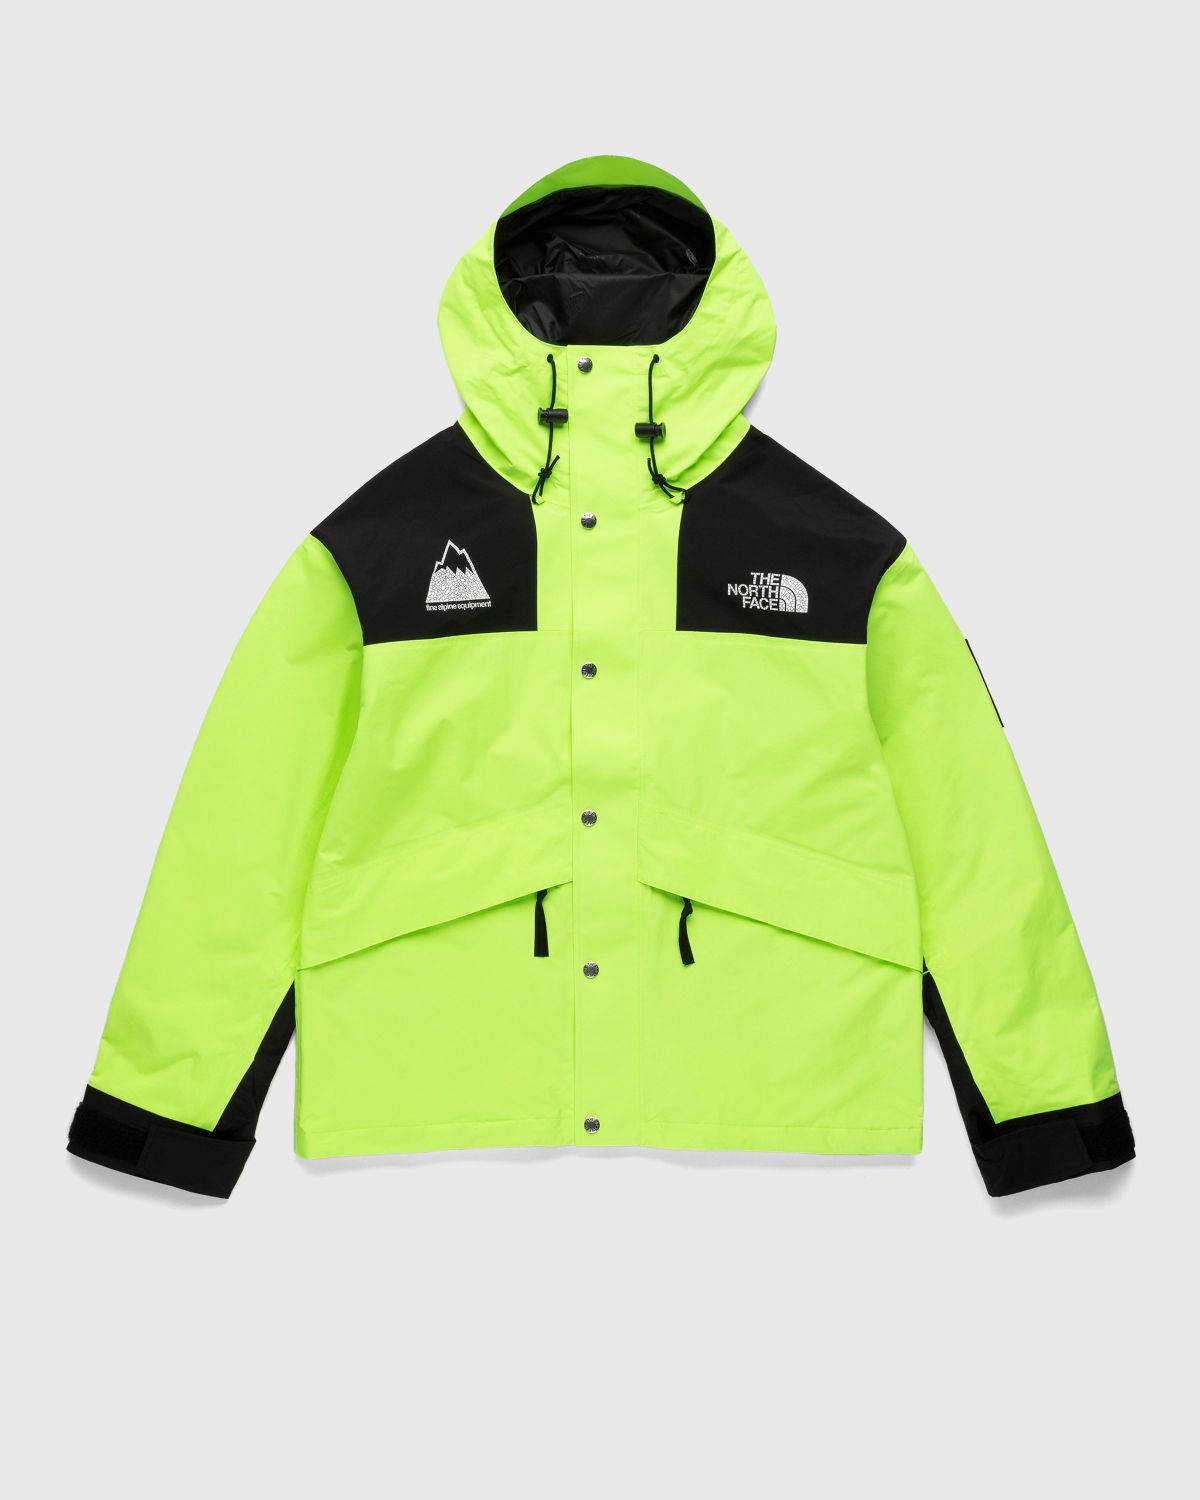 The North Face – M Jacket Origins | Green Shop Highsnobiety 86 Mountain Safety